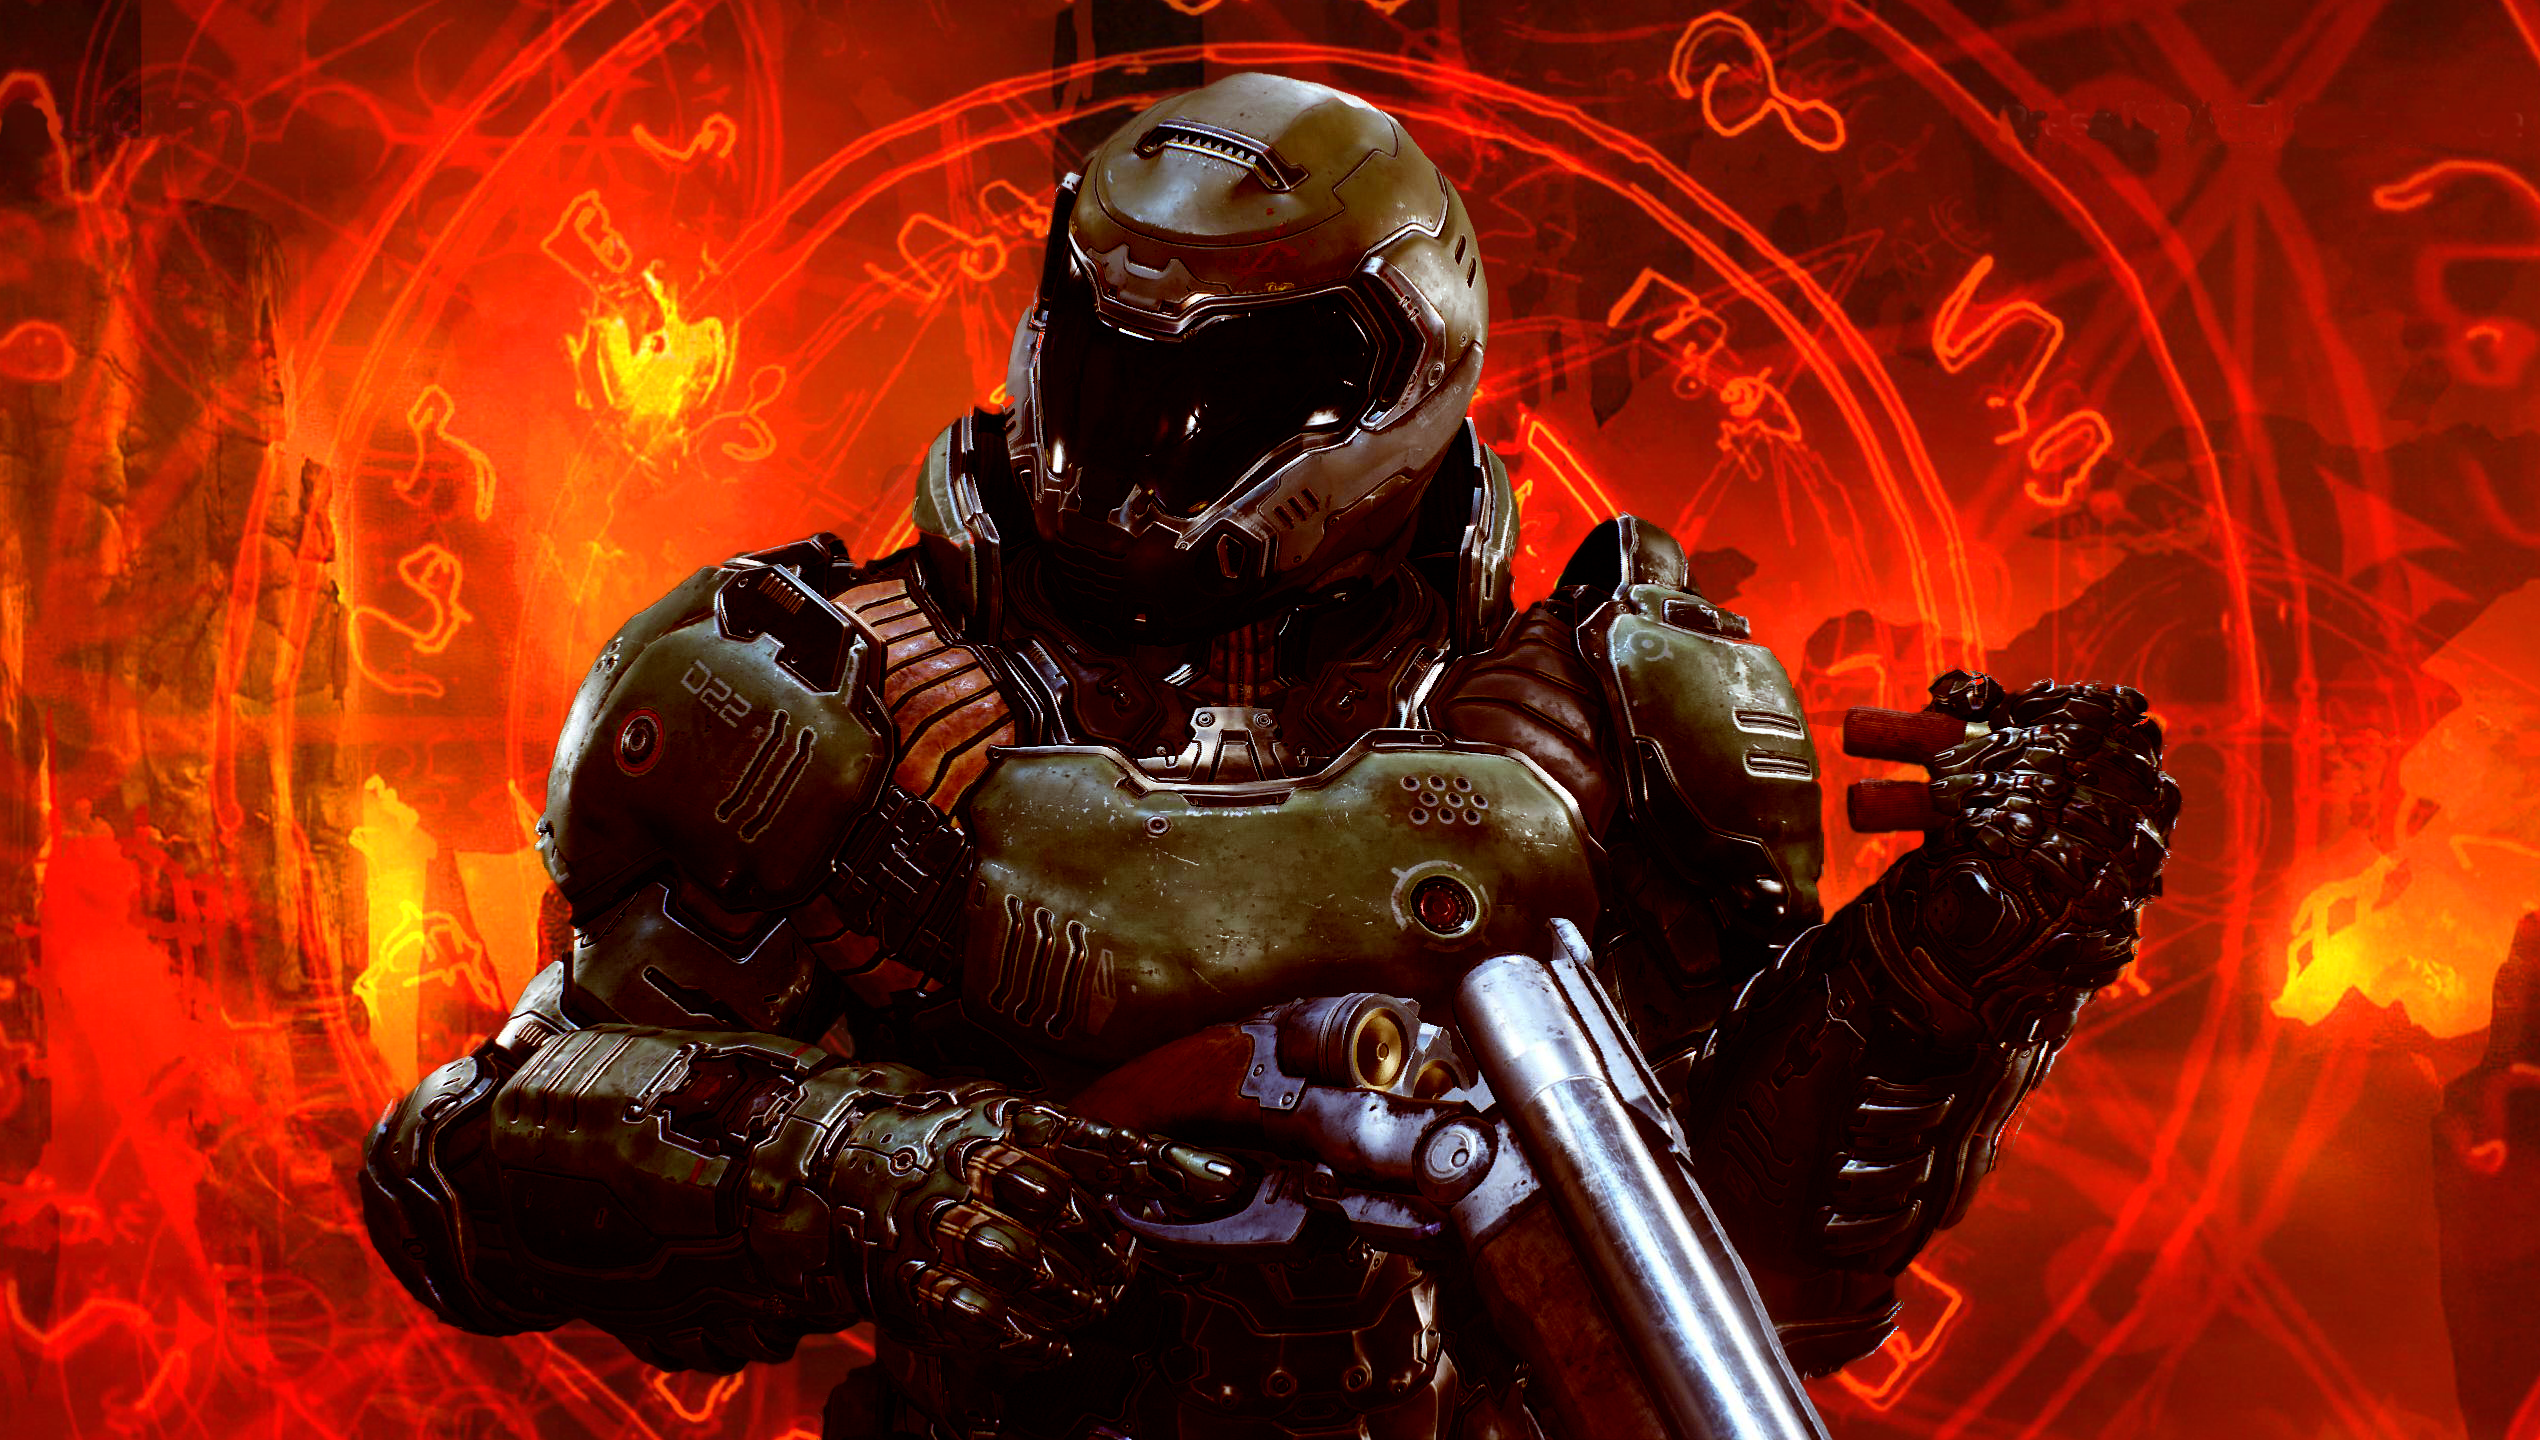 doom wallpaper,action adventure game,pc game,fictional character,games,cg artwork